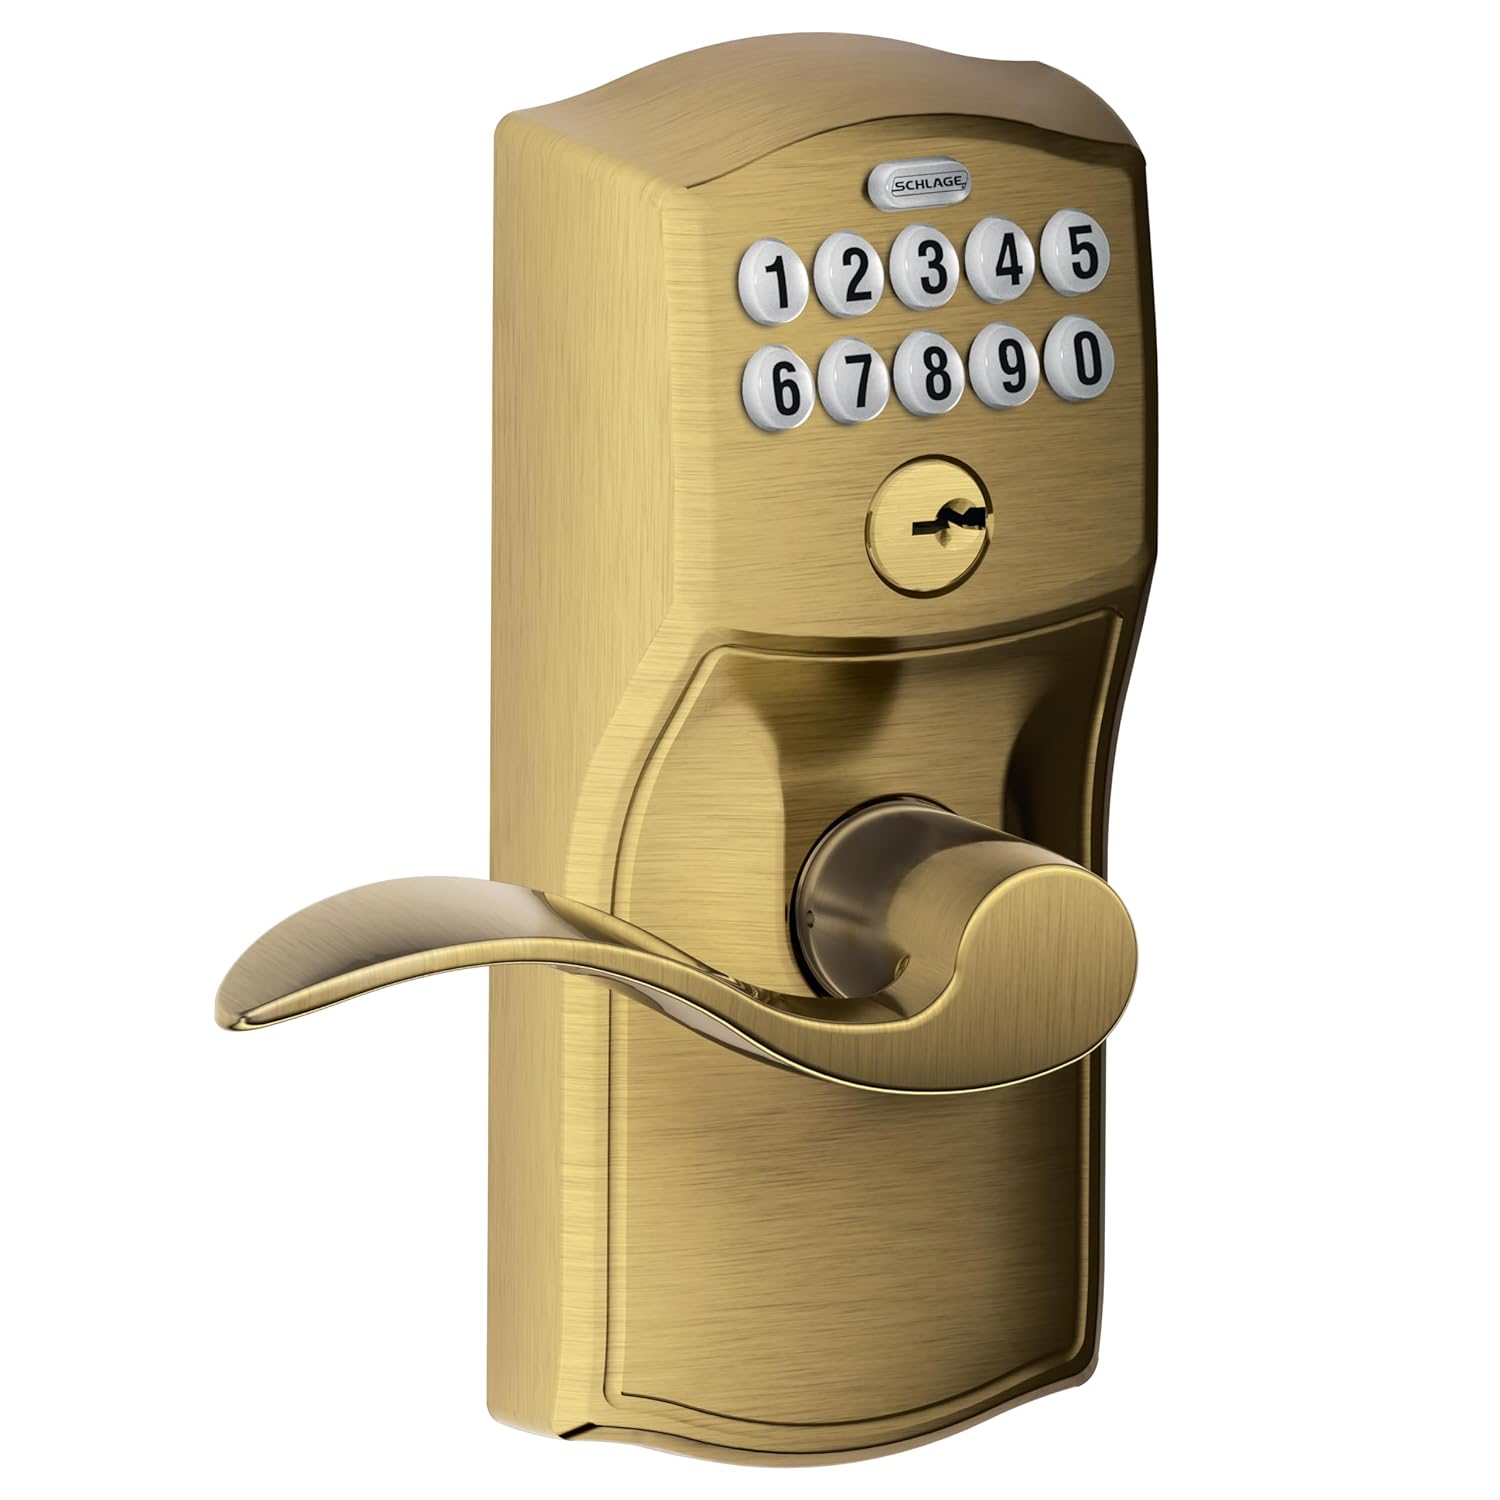 Schlage FE595 CAM 609 Acc Camelot Keypad Entry with Flex-Lock and Accent Levers, Antique Brass